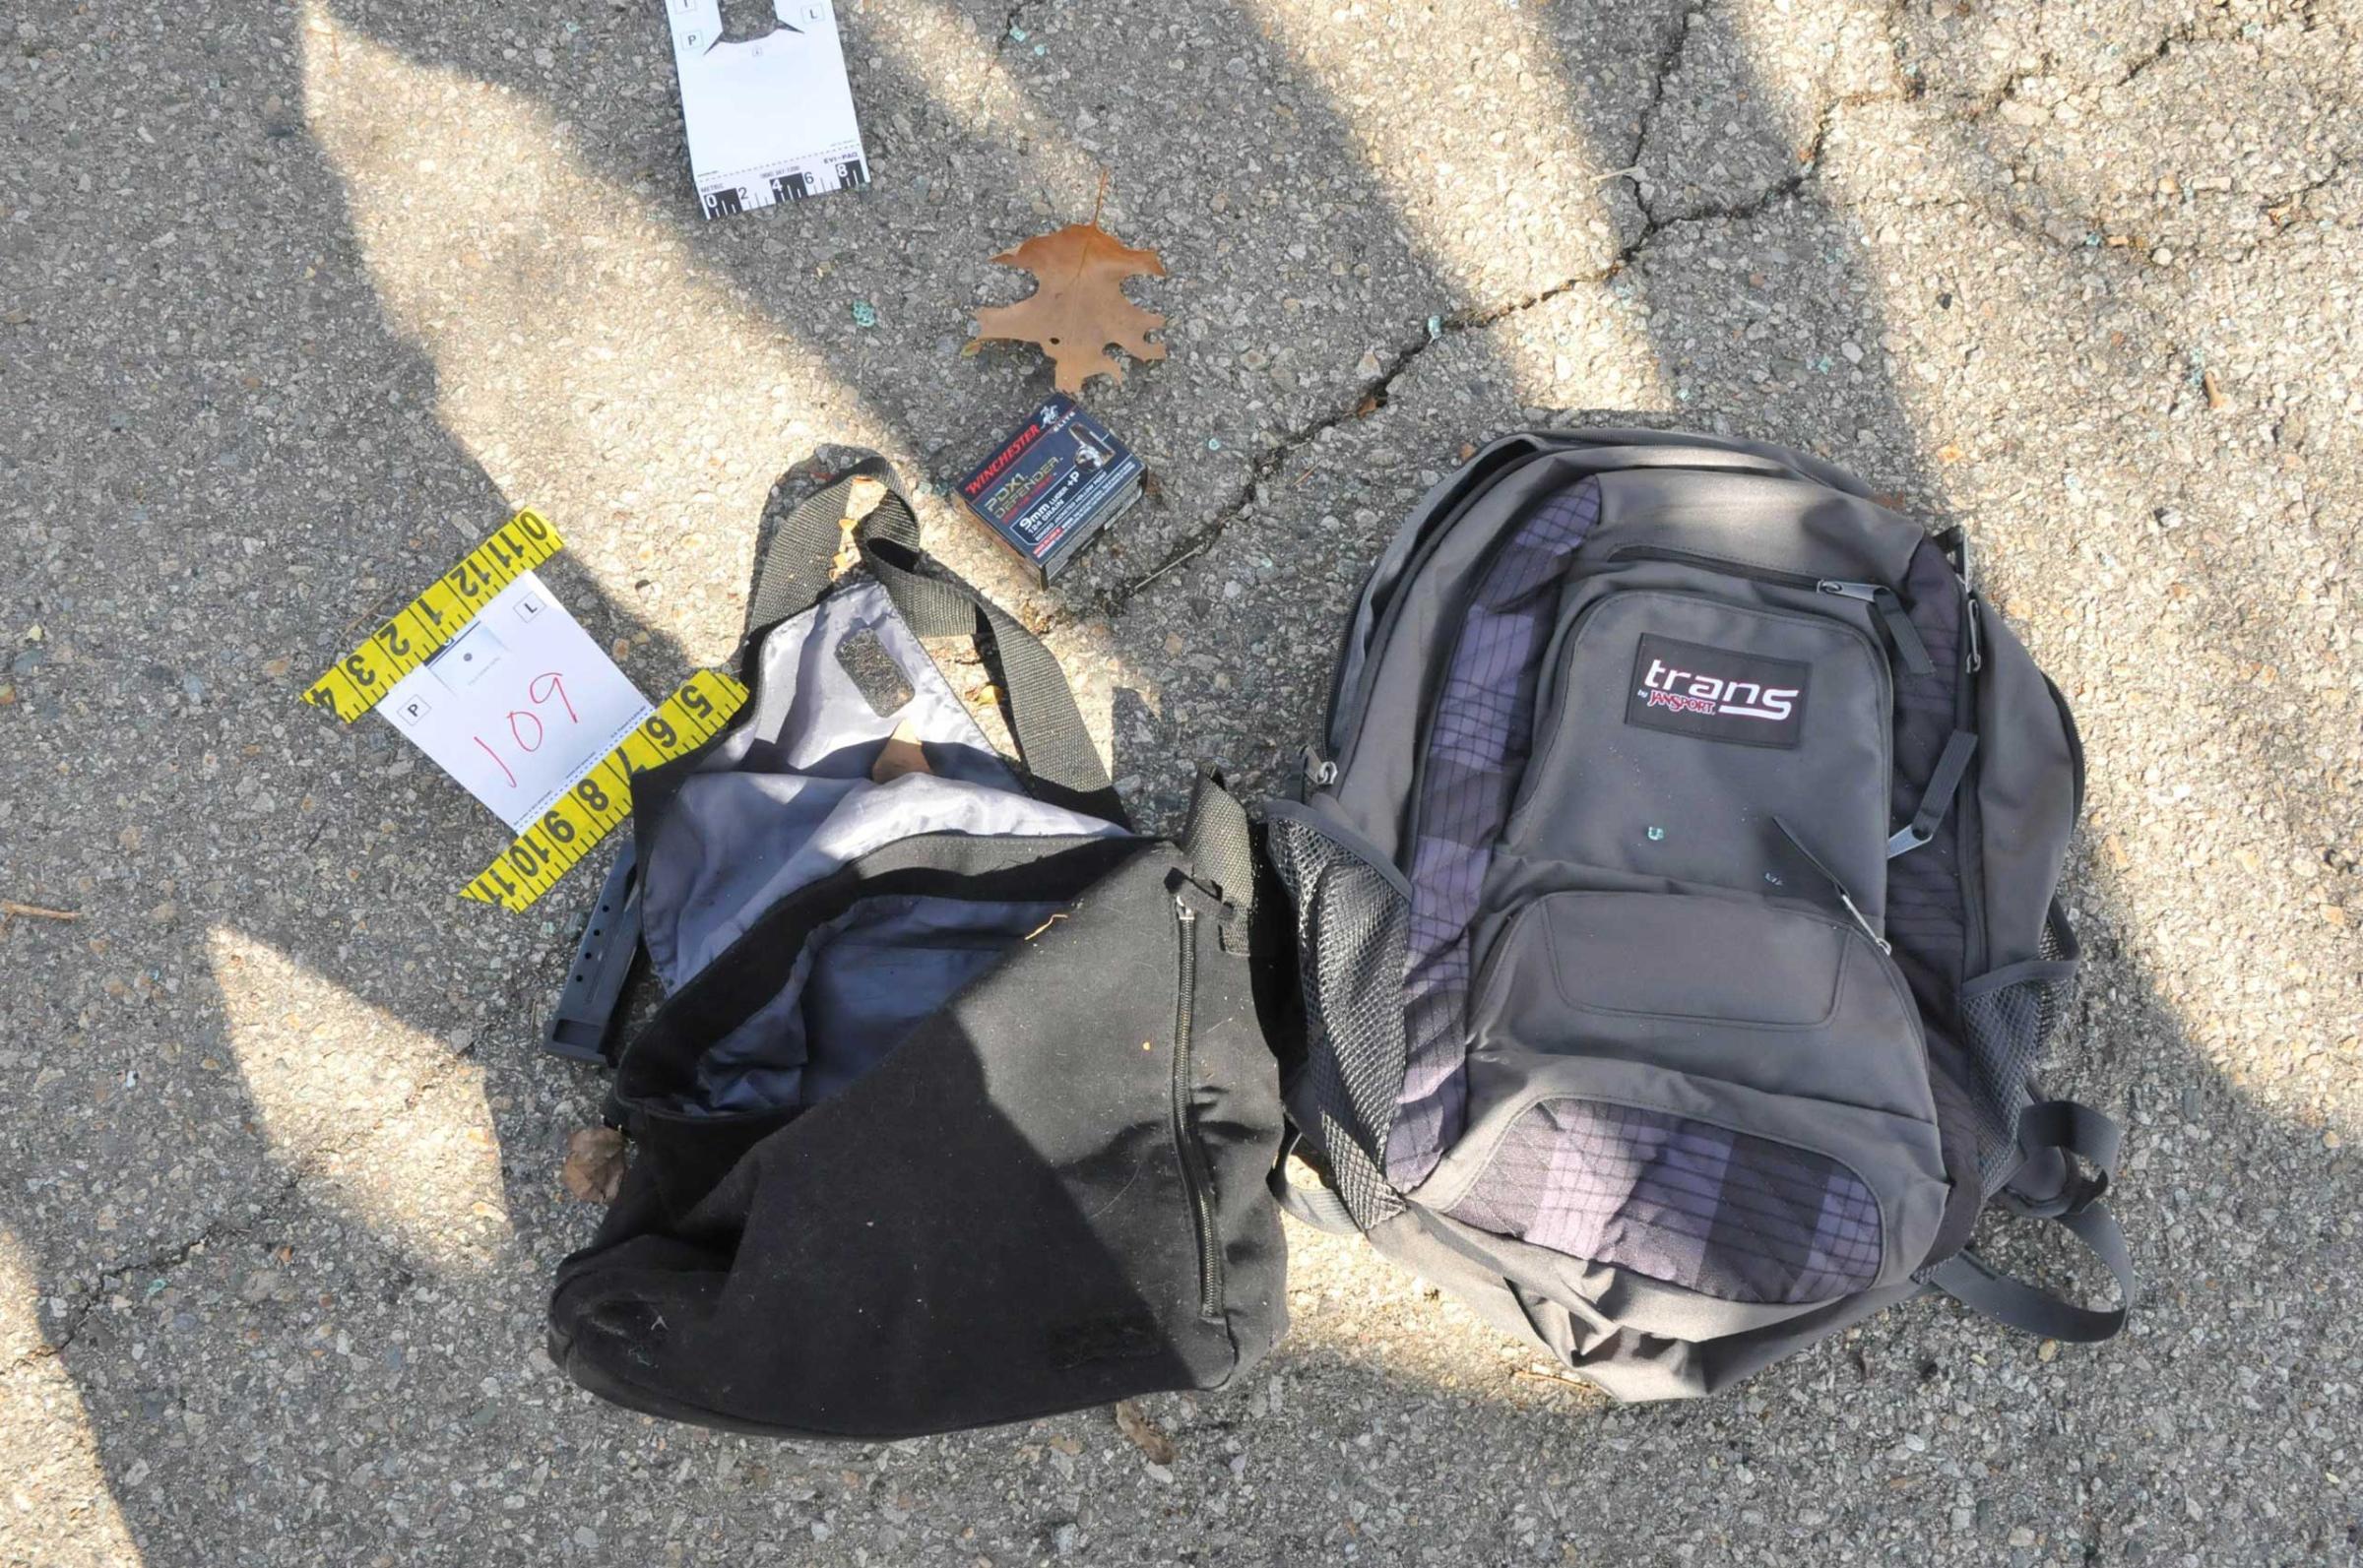 A 9mm Luger clip and bullet package sit next to a backpack and bag on a street where Tamerlan and Dzhokhar Tsarnaev engaged in a gunfight with police in this undated handout evidence photo